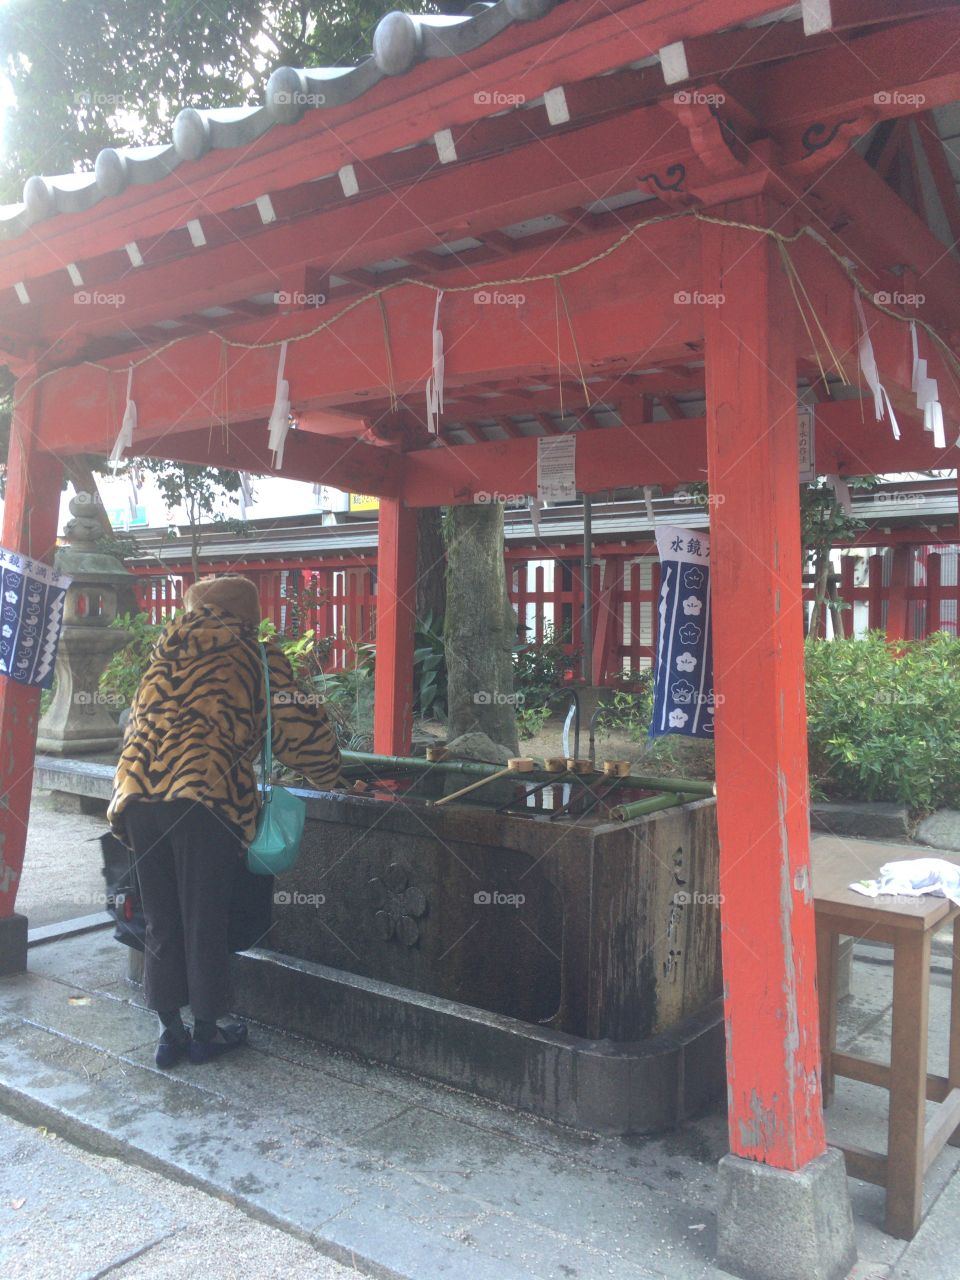 At a shrine in Japan 